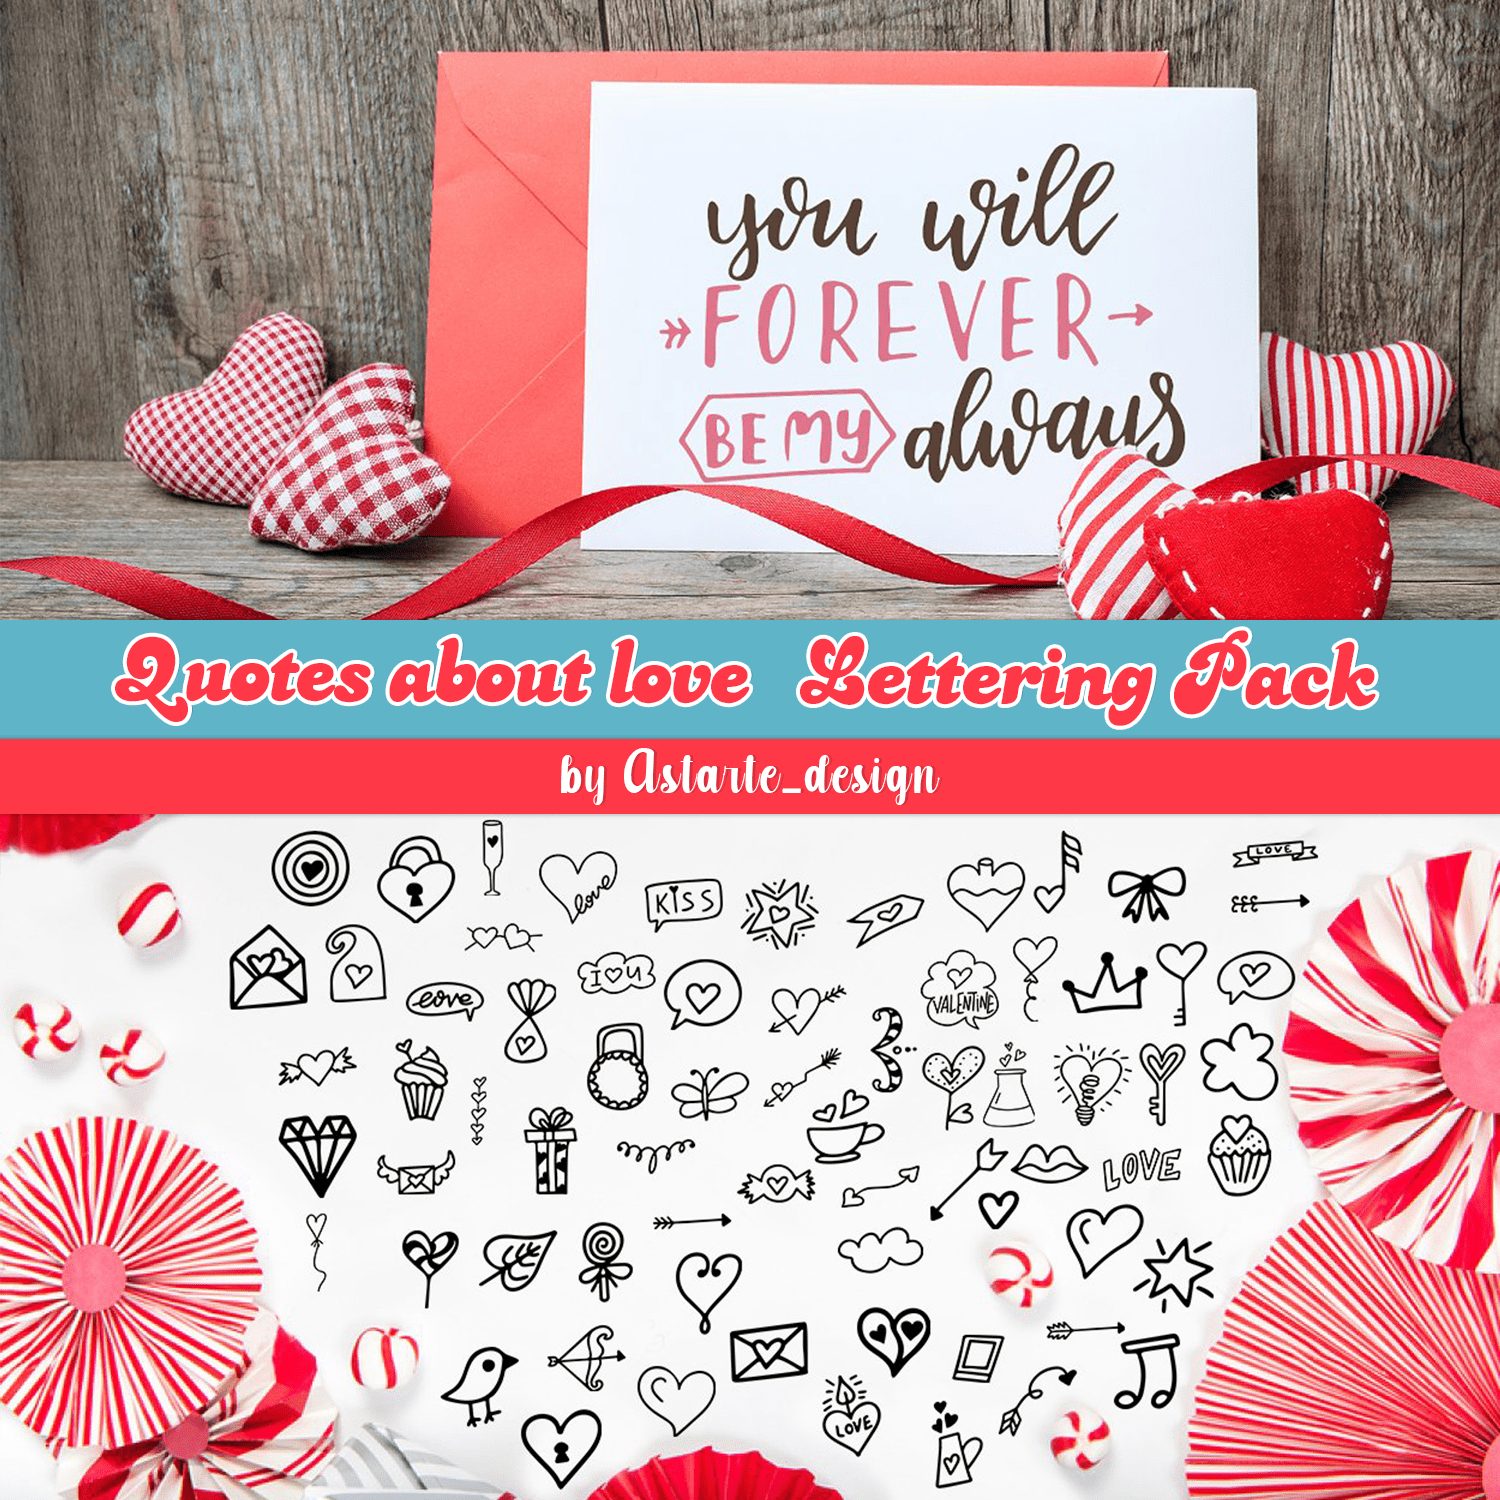 Quotes about love-Lettering Pack Astarte_design cover.